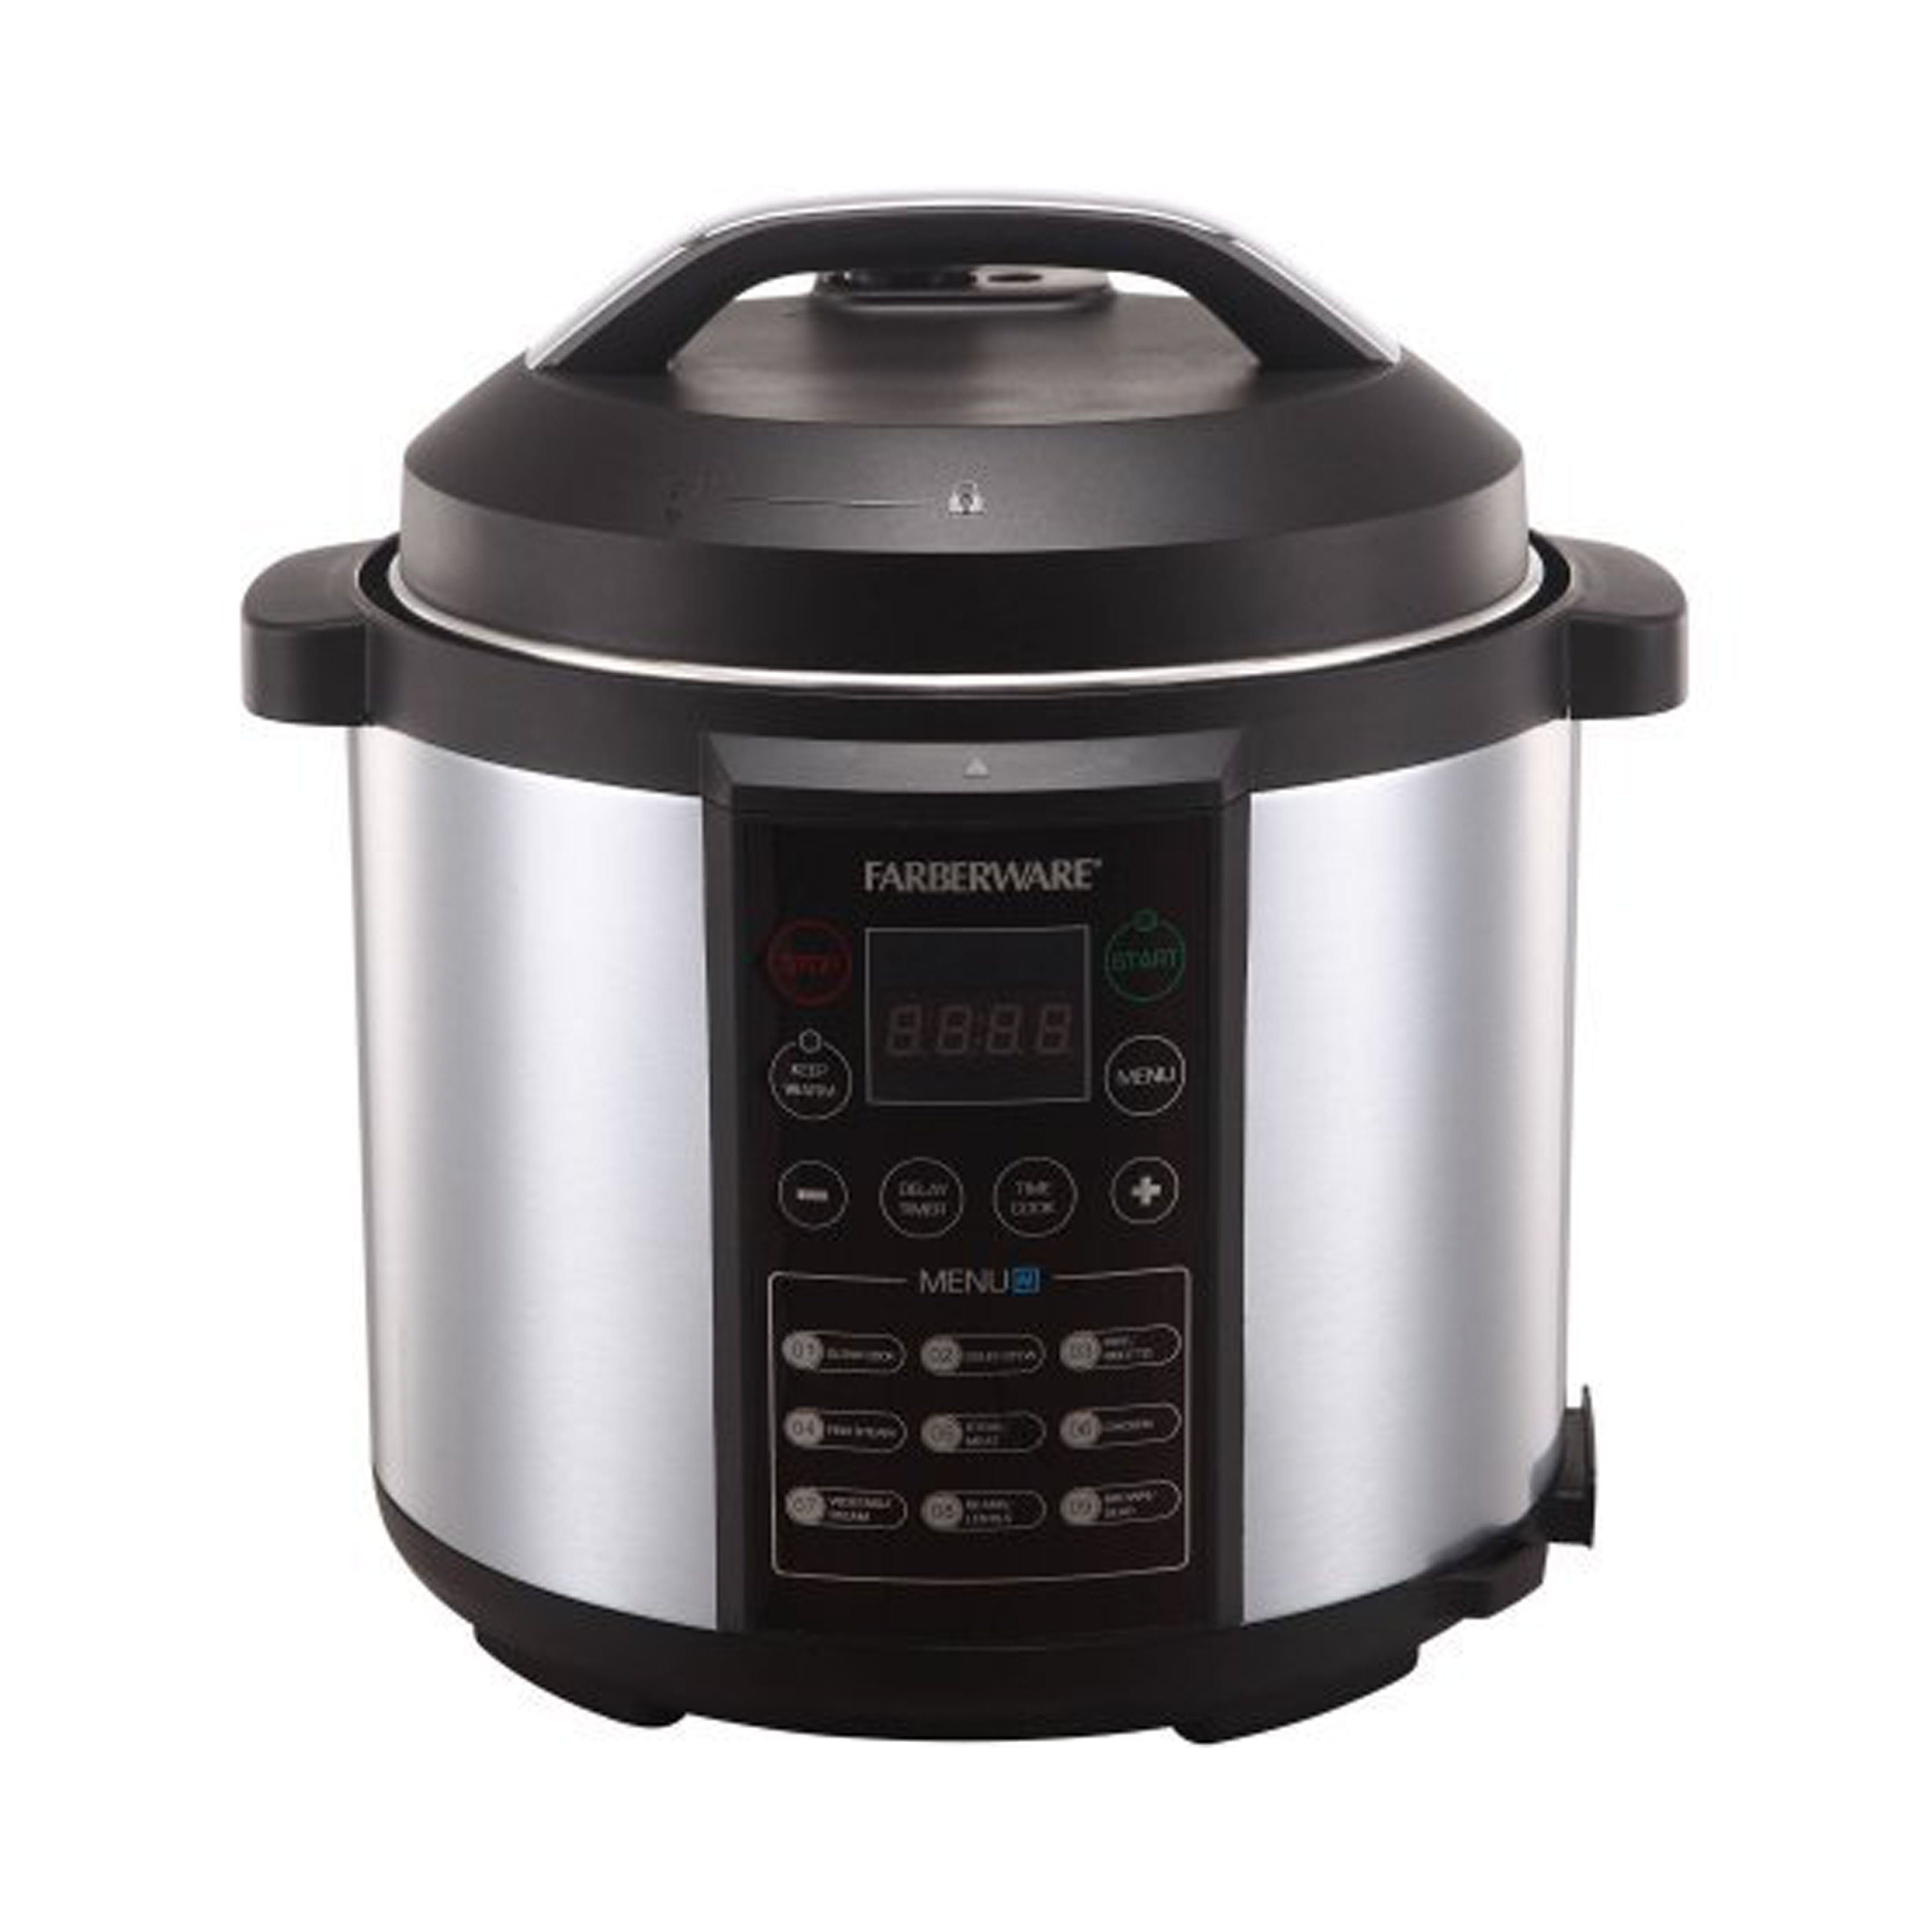 Farberware Pressure Cooker Review, Price and Features - Pros and